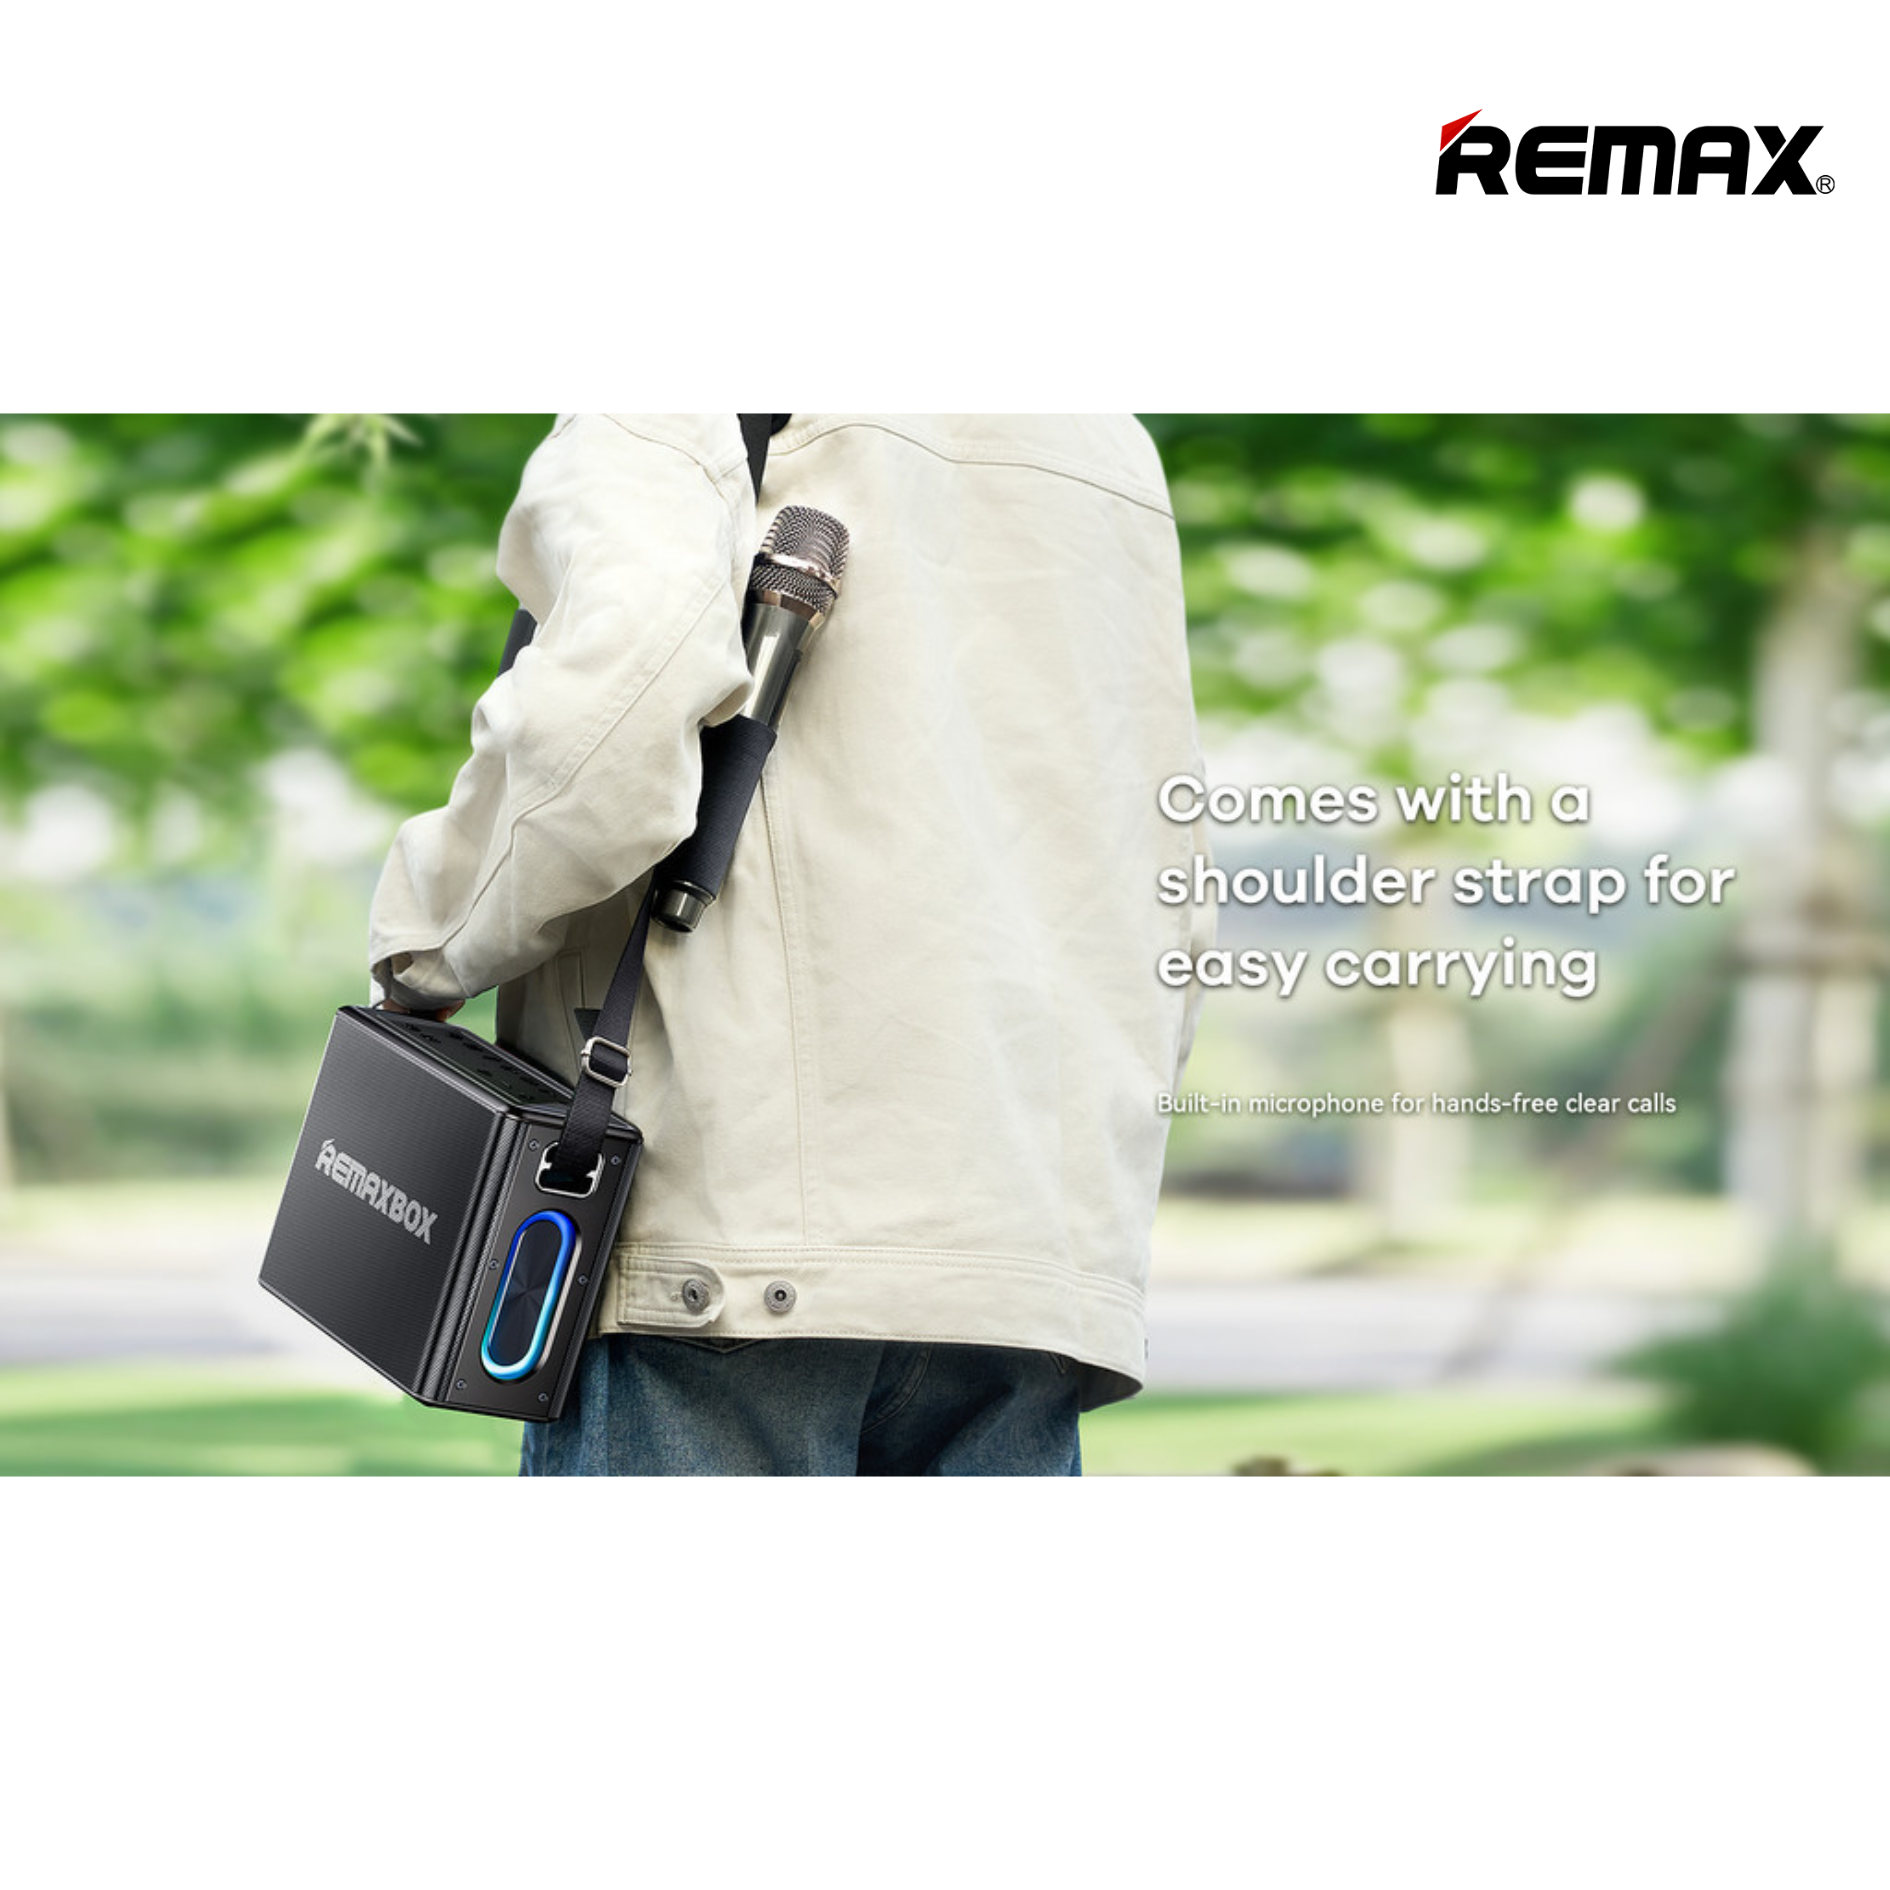 Remax RB-M51 5.4 Chenyie Series Portable Wireless Speaker With Light (120W) - Silver